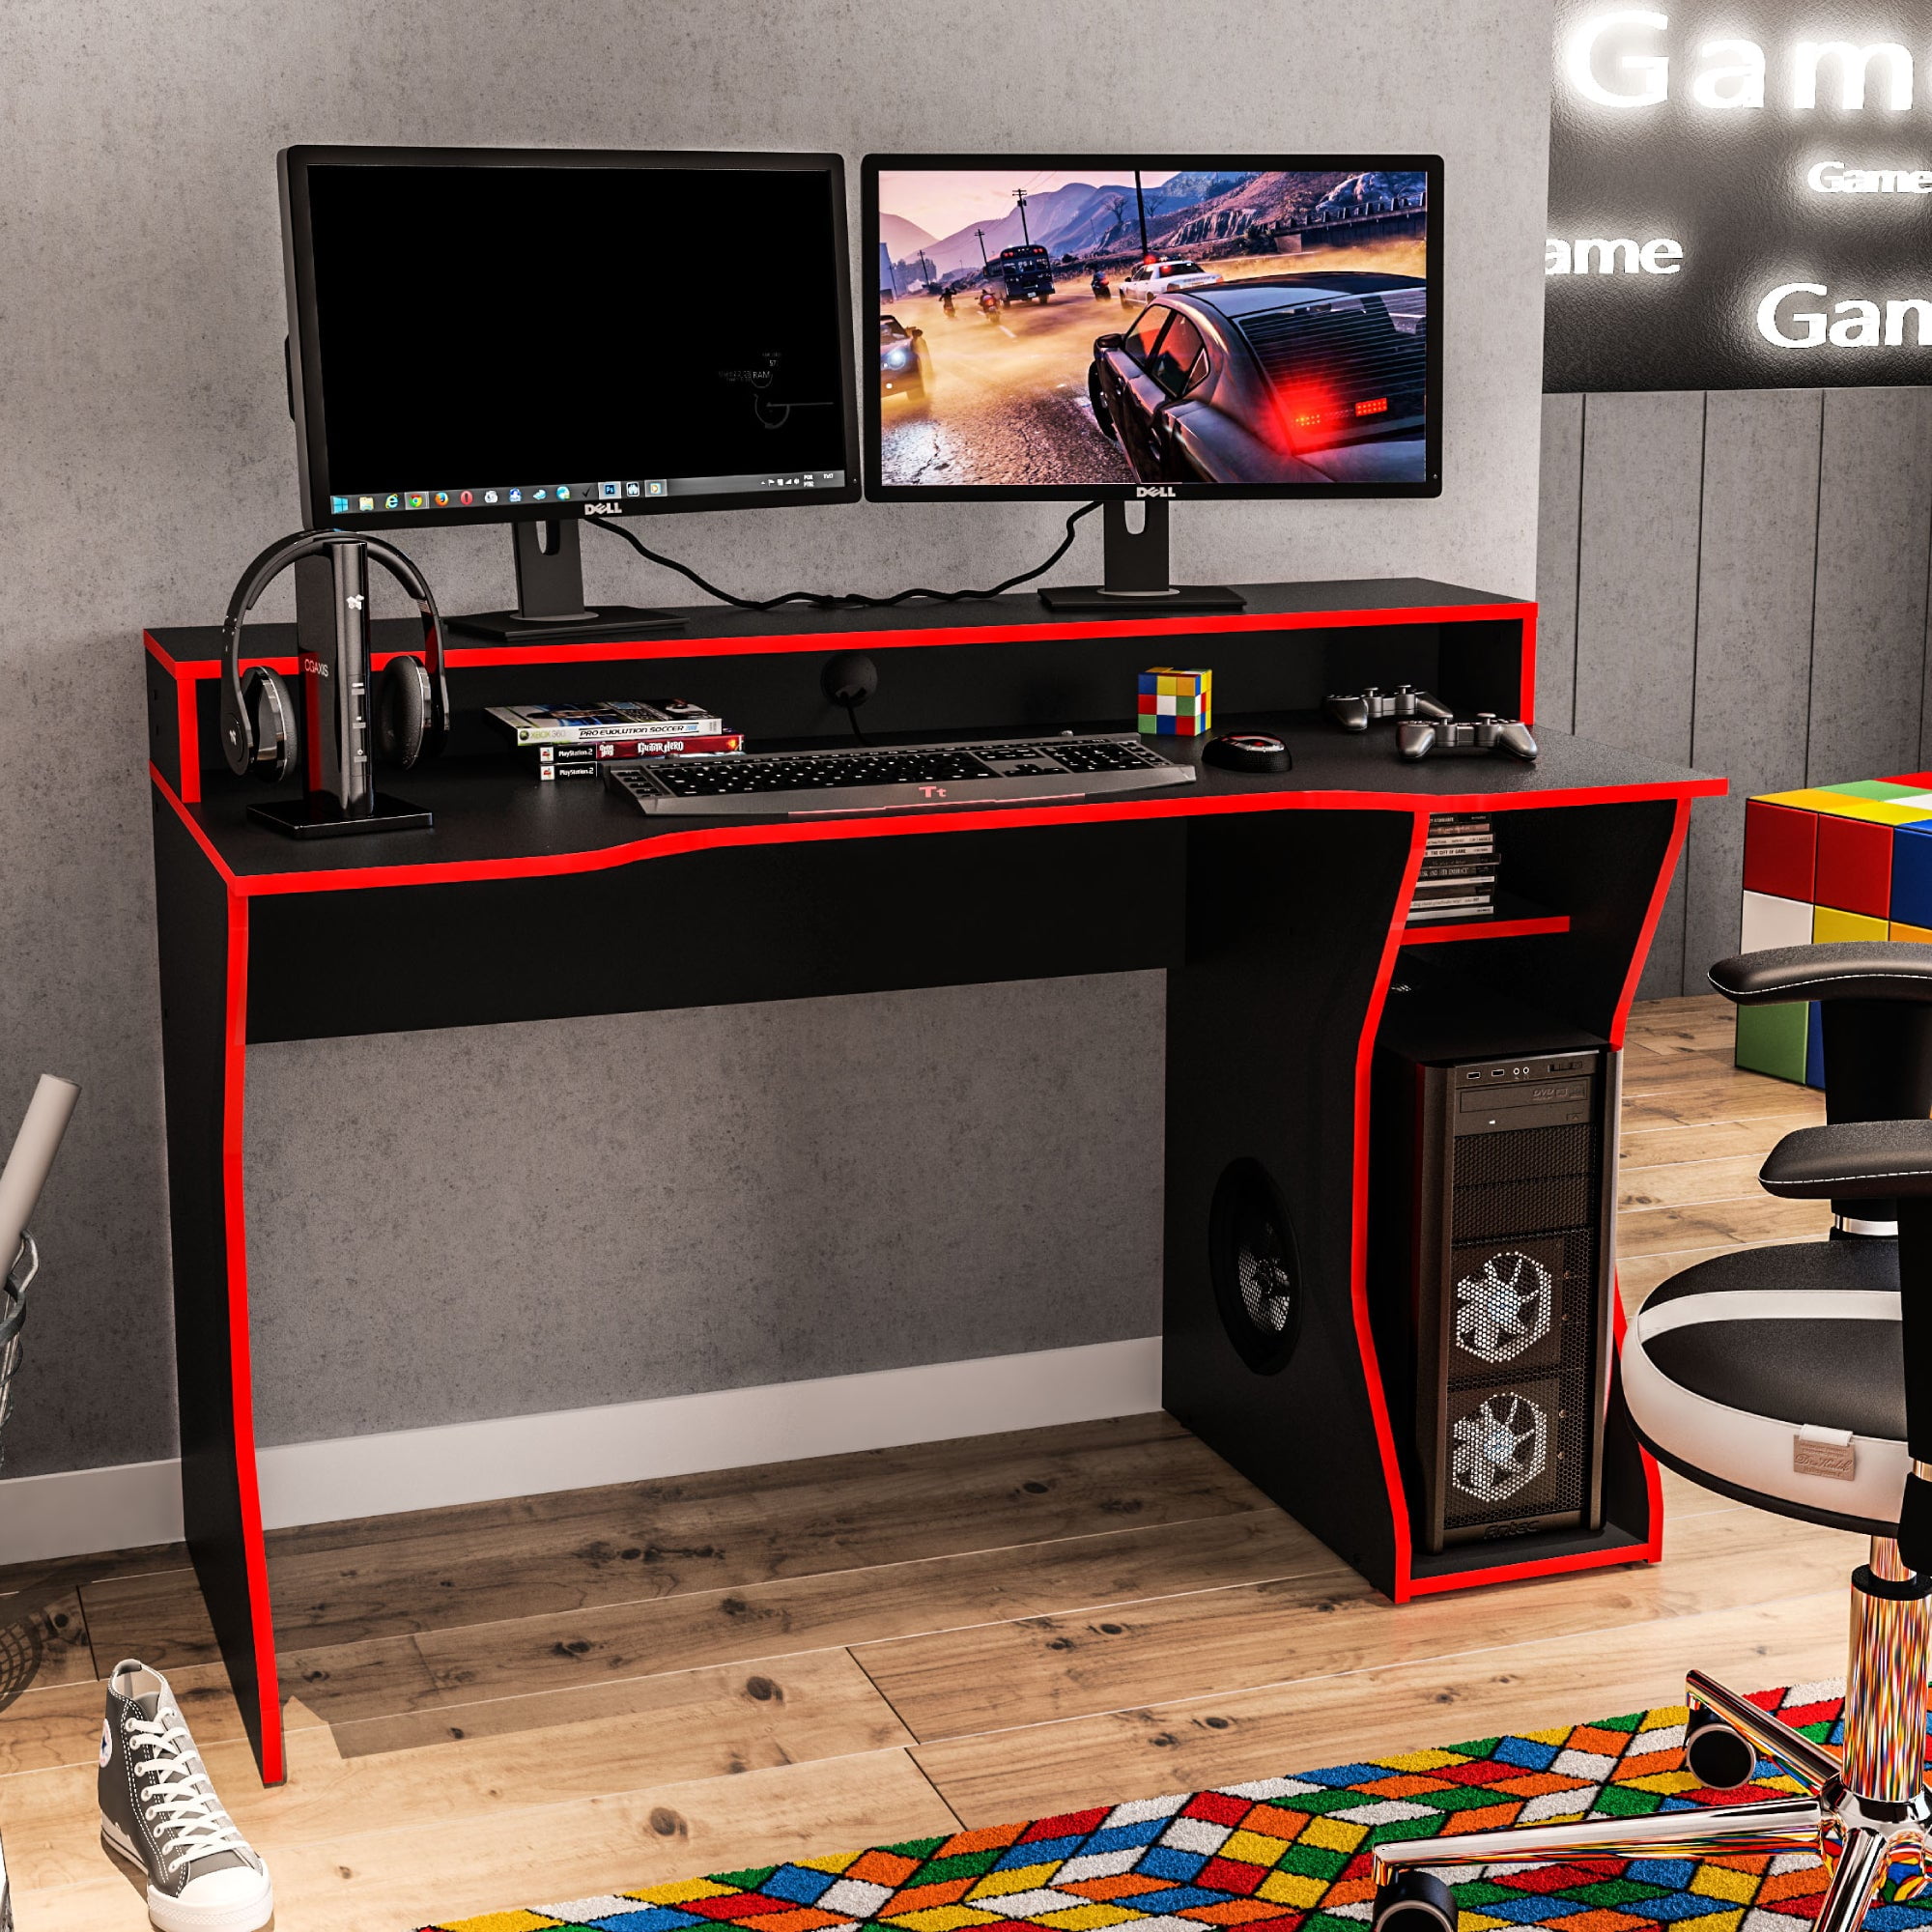 2 Decks 41" RGB LED Computer Desk with Keyboard Tray Gaming Table E-sports Gamer 